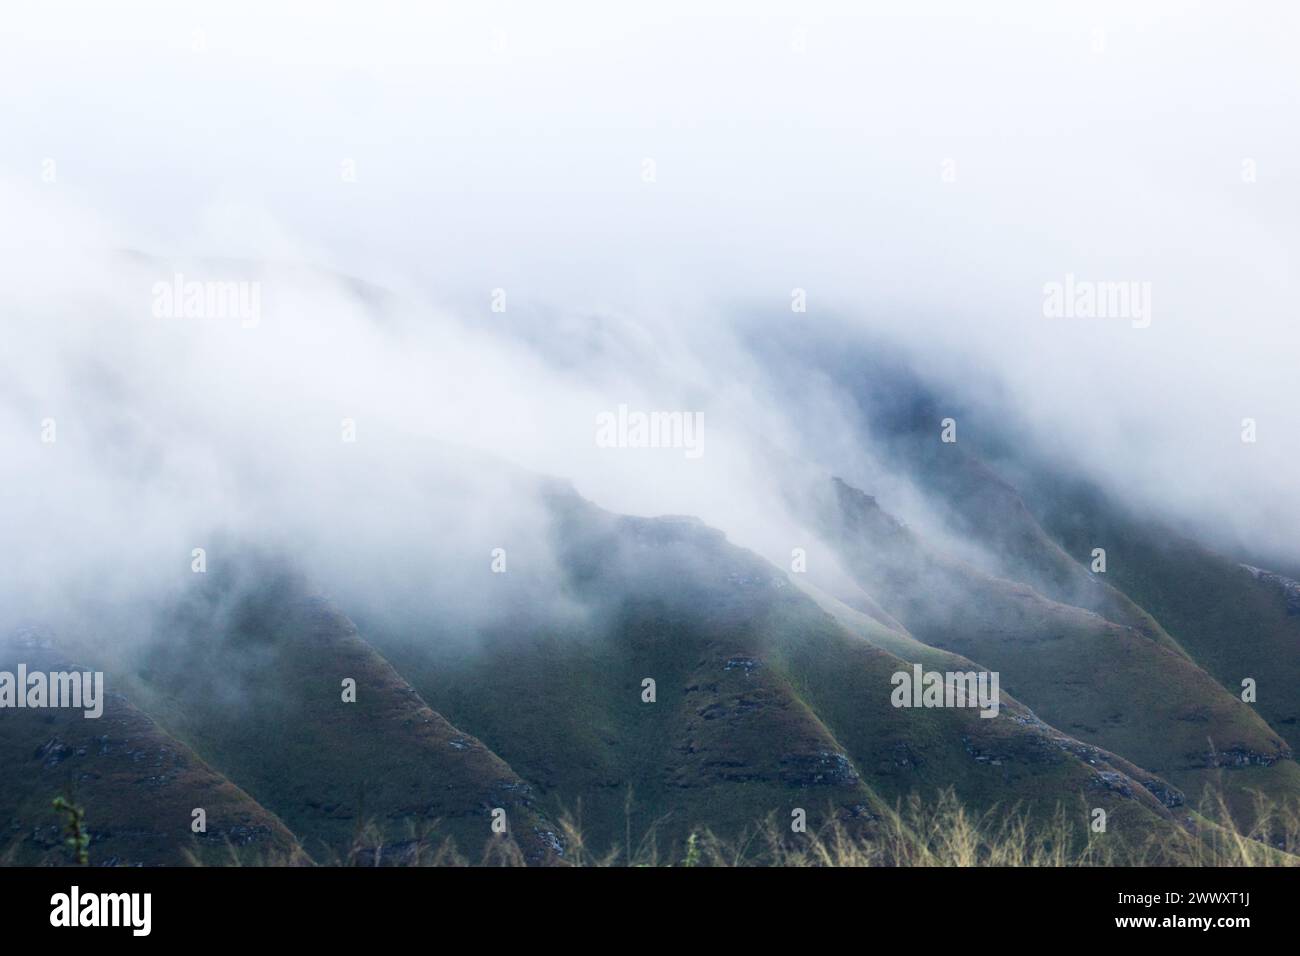 The grass covered ridges and valleys of the Drakensberg mountains at Highmoor, South Africa, Hidden by early morning fog Stock Photo